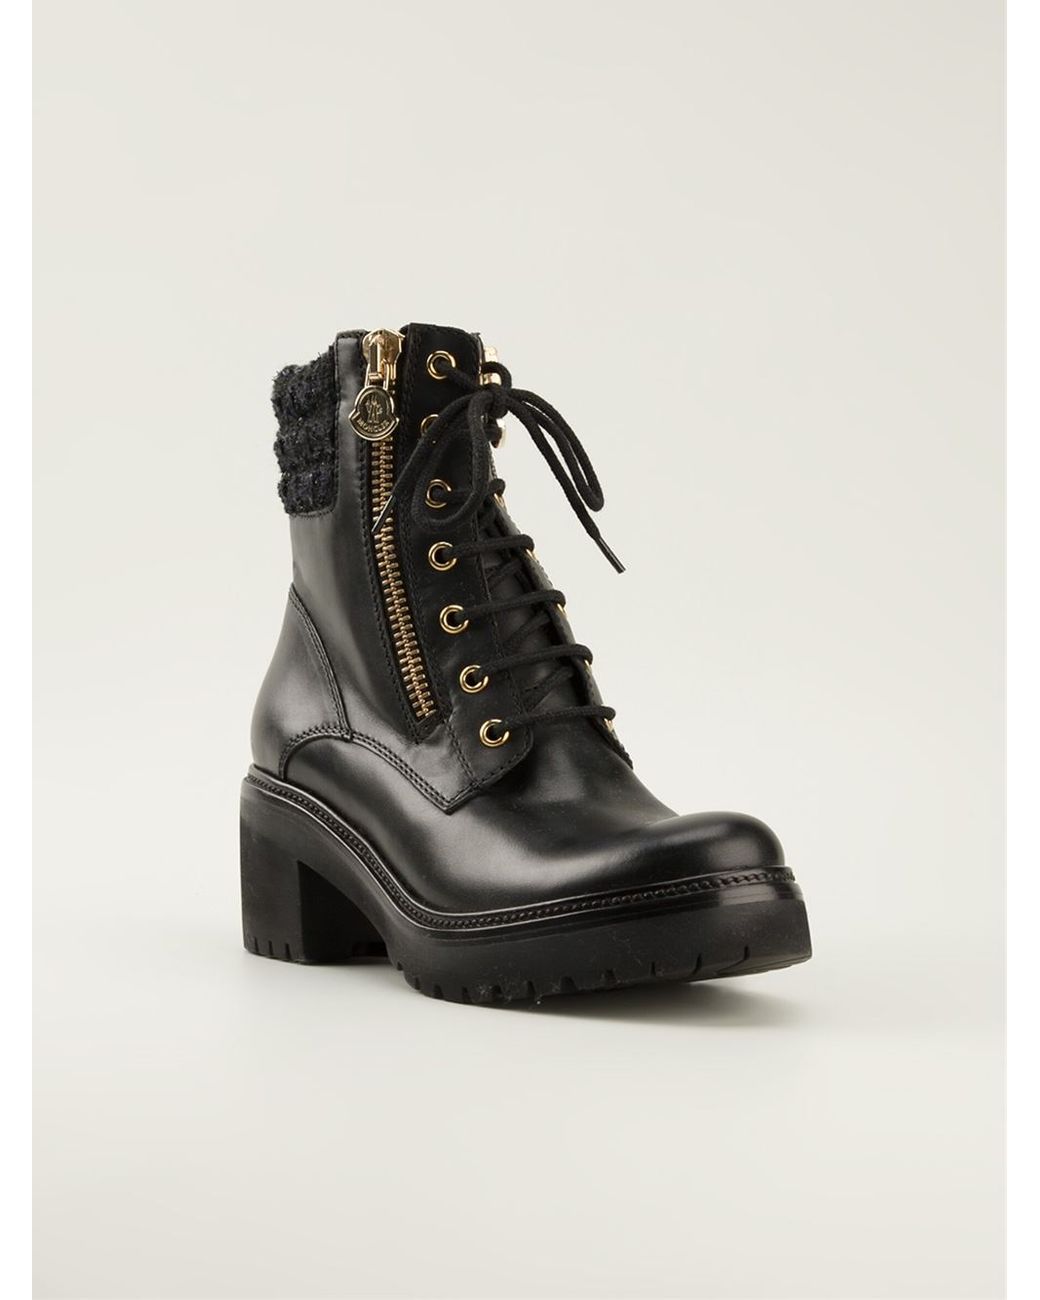 Moncler 'Viviane' Ankle Boots in Black | Lyst